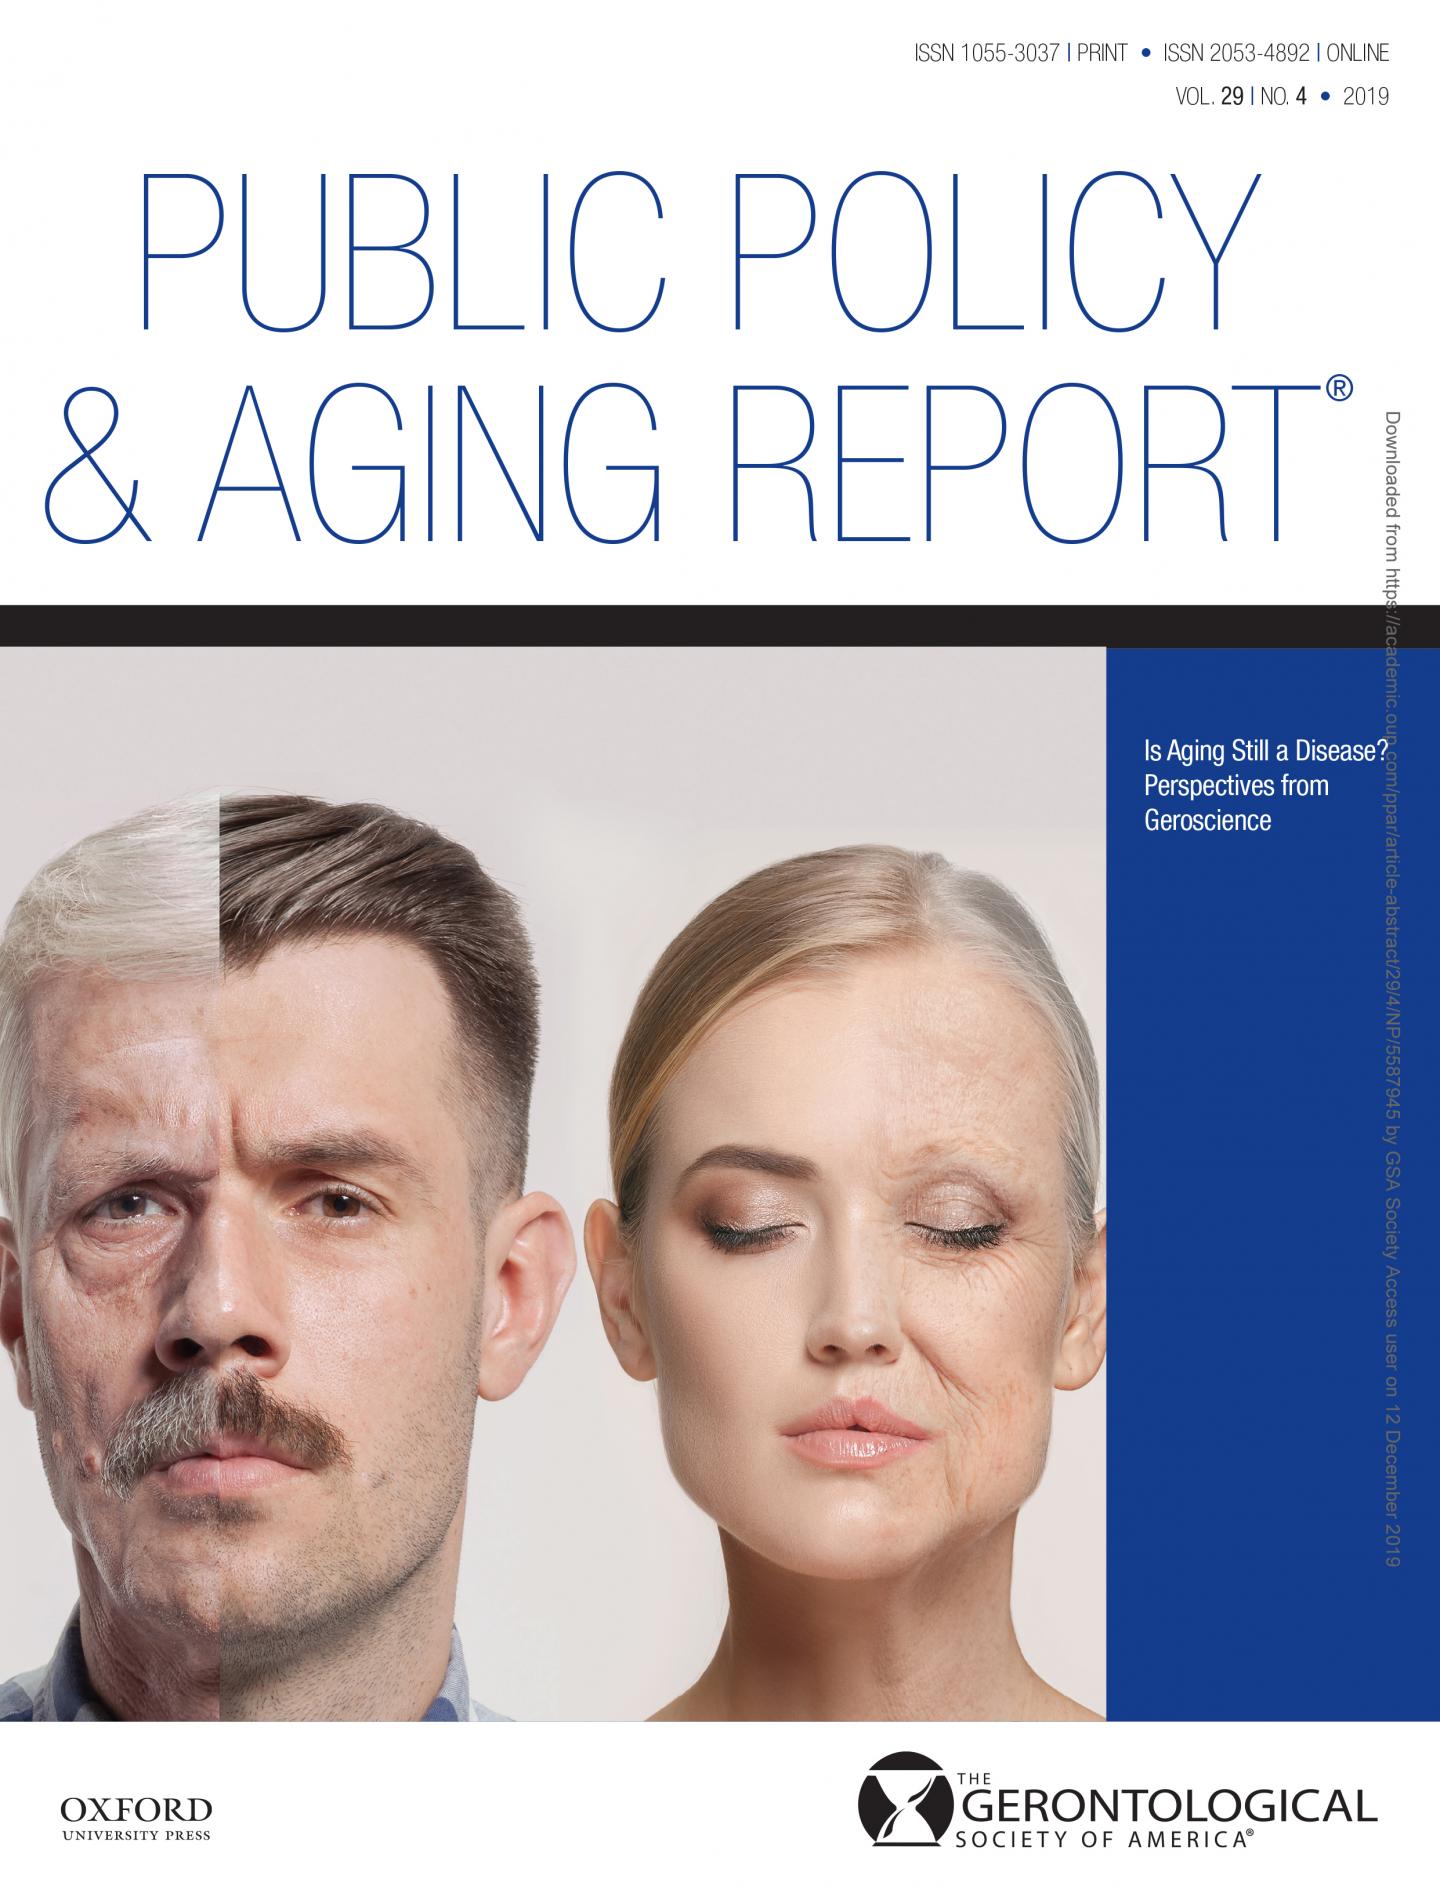 Public Policy & Aging Report